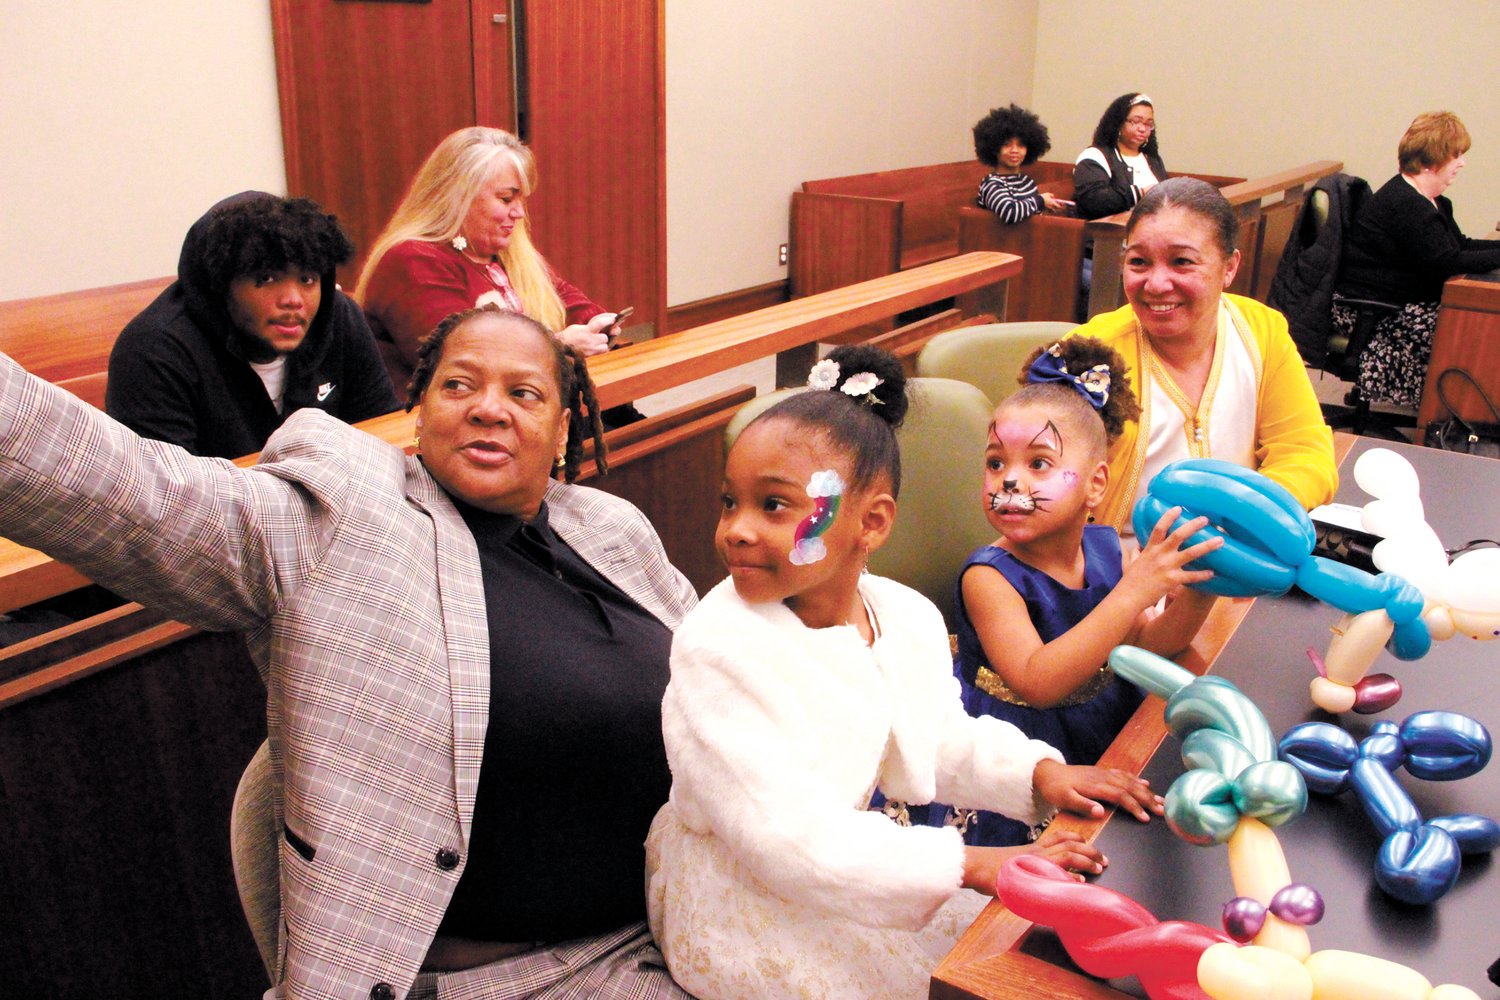 A COURTROOM SELFIE:  Wanda Smith gabs a selfie of her daughter Leia, Marilee Smith  and Lillybelly Brown on arriving in the courtroom Saturday.